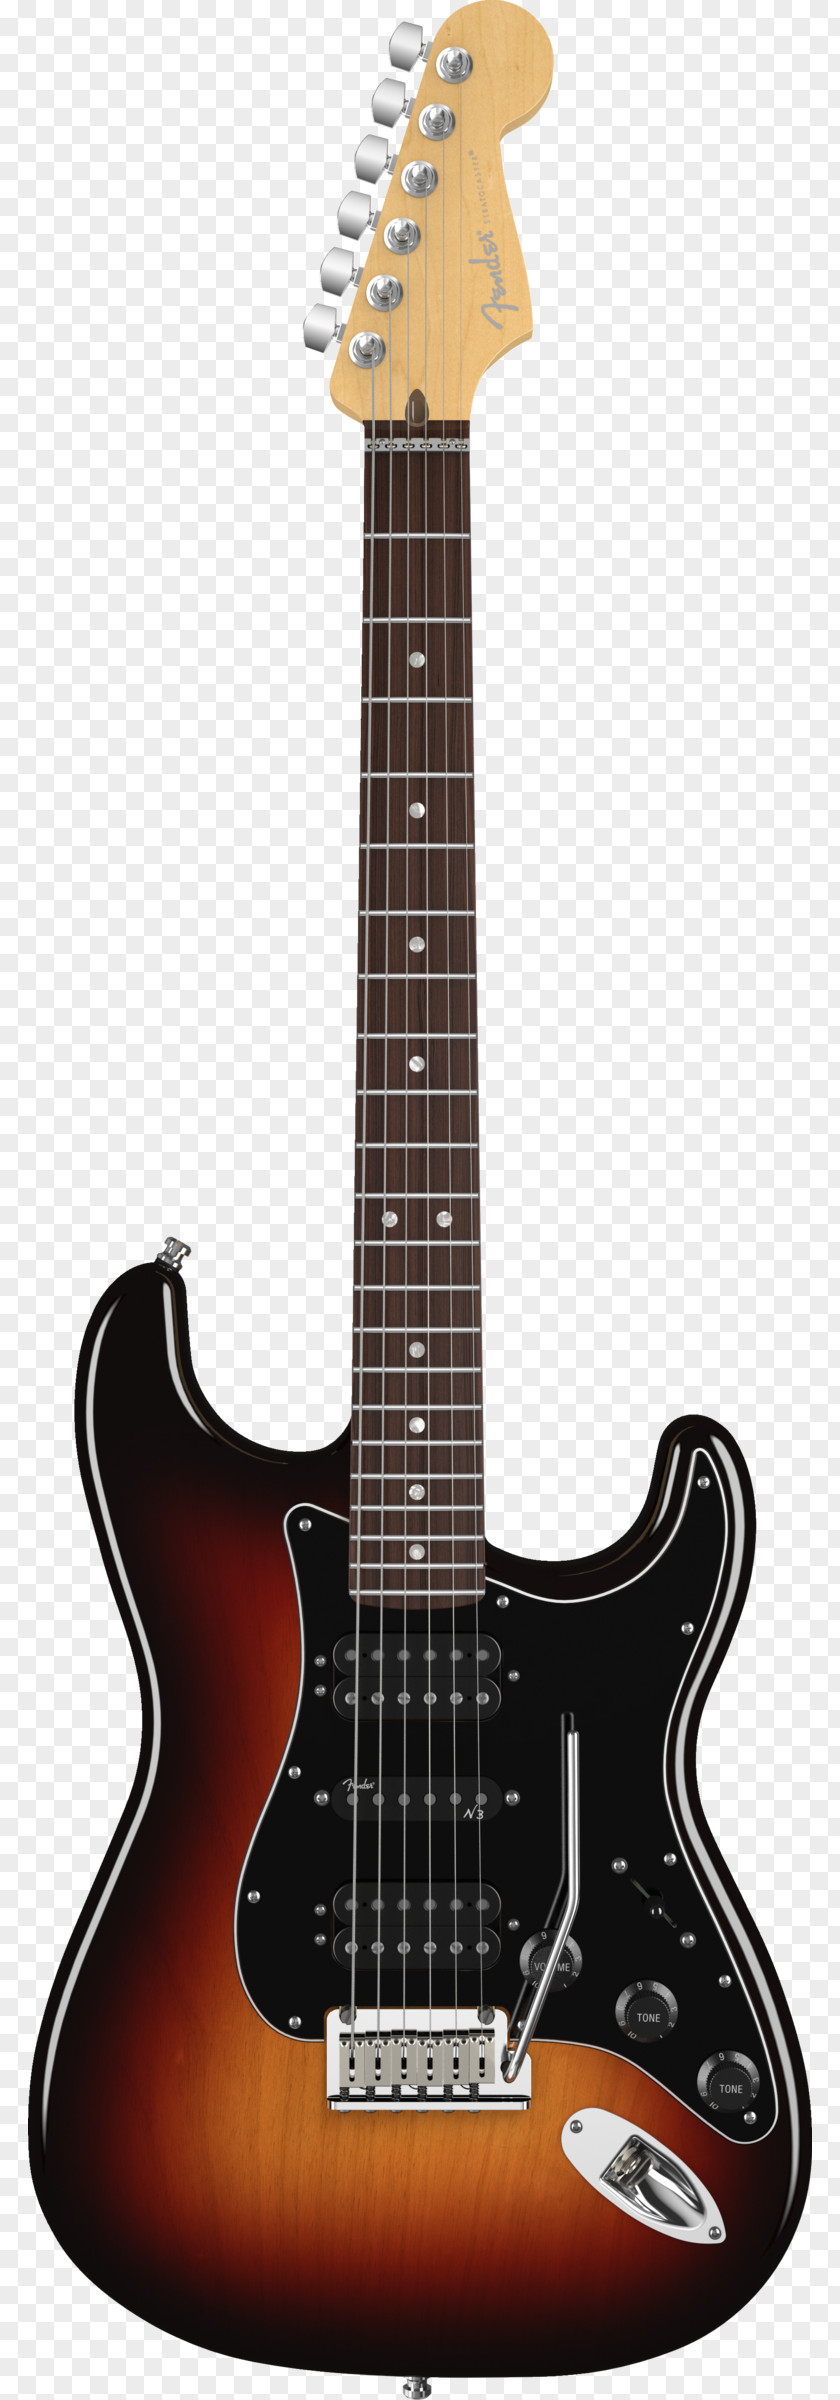 Bass Guitar Fender Stratocaster Musical Instruments Corporation PNG